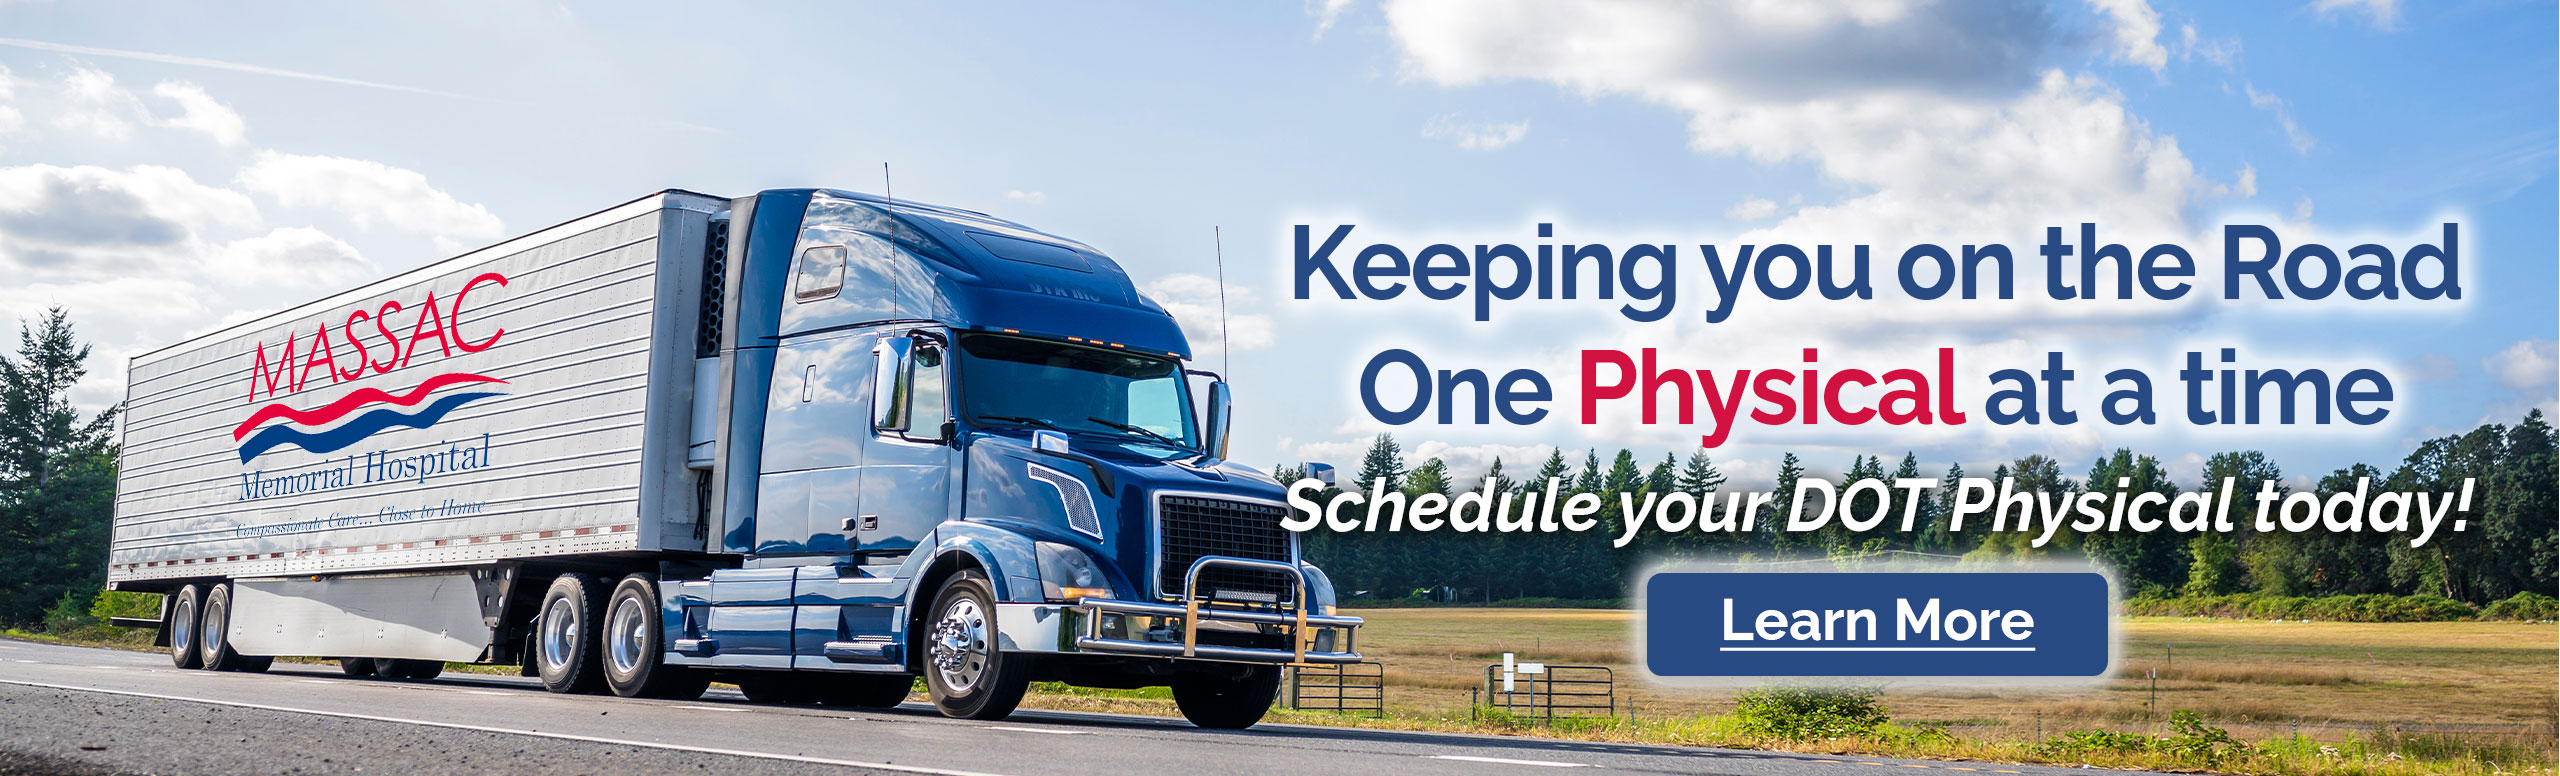 Keeping you on the road one physical at a time

Schedule your DOT Physical today!

Learn More